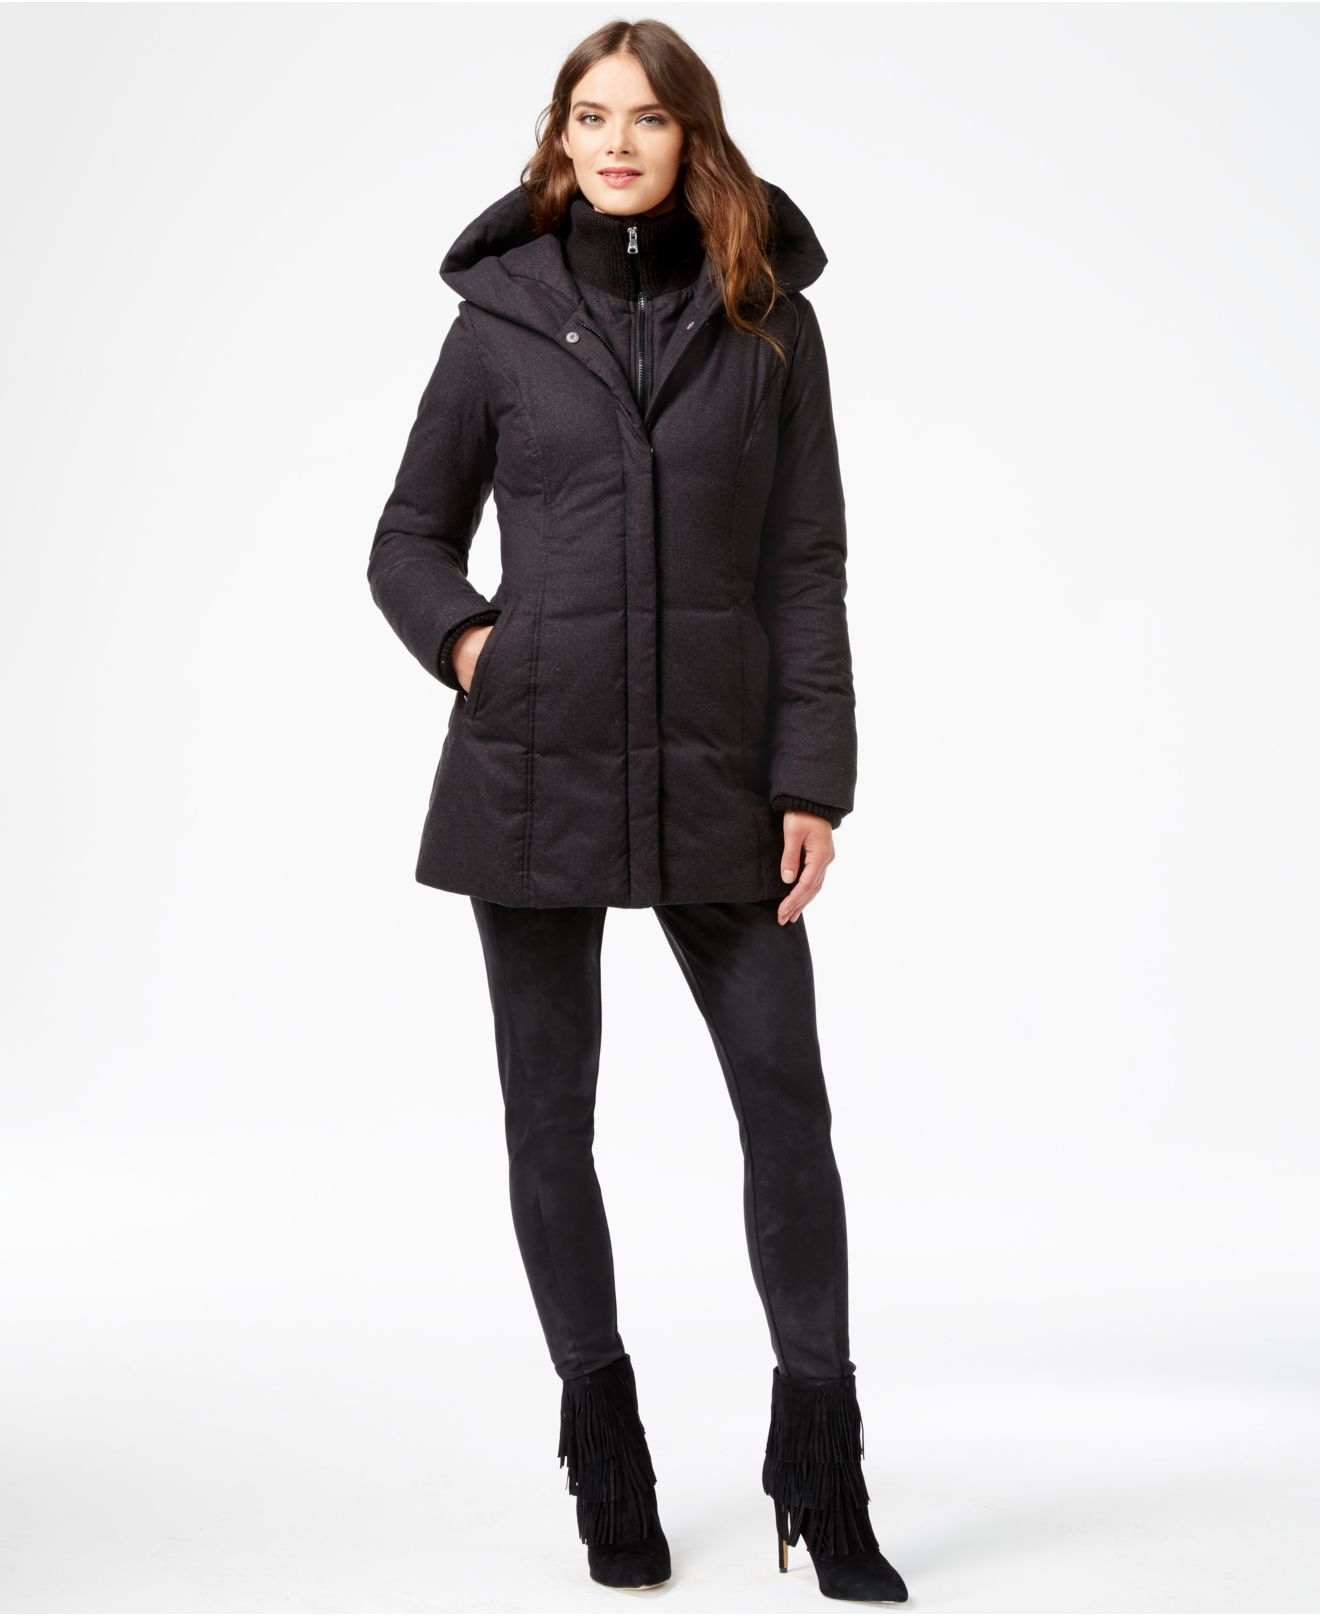 Lyst - Jessica simpson Hooded Layered Puffer Coat in Gray1320 x 1616